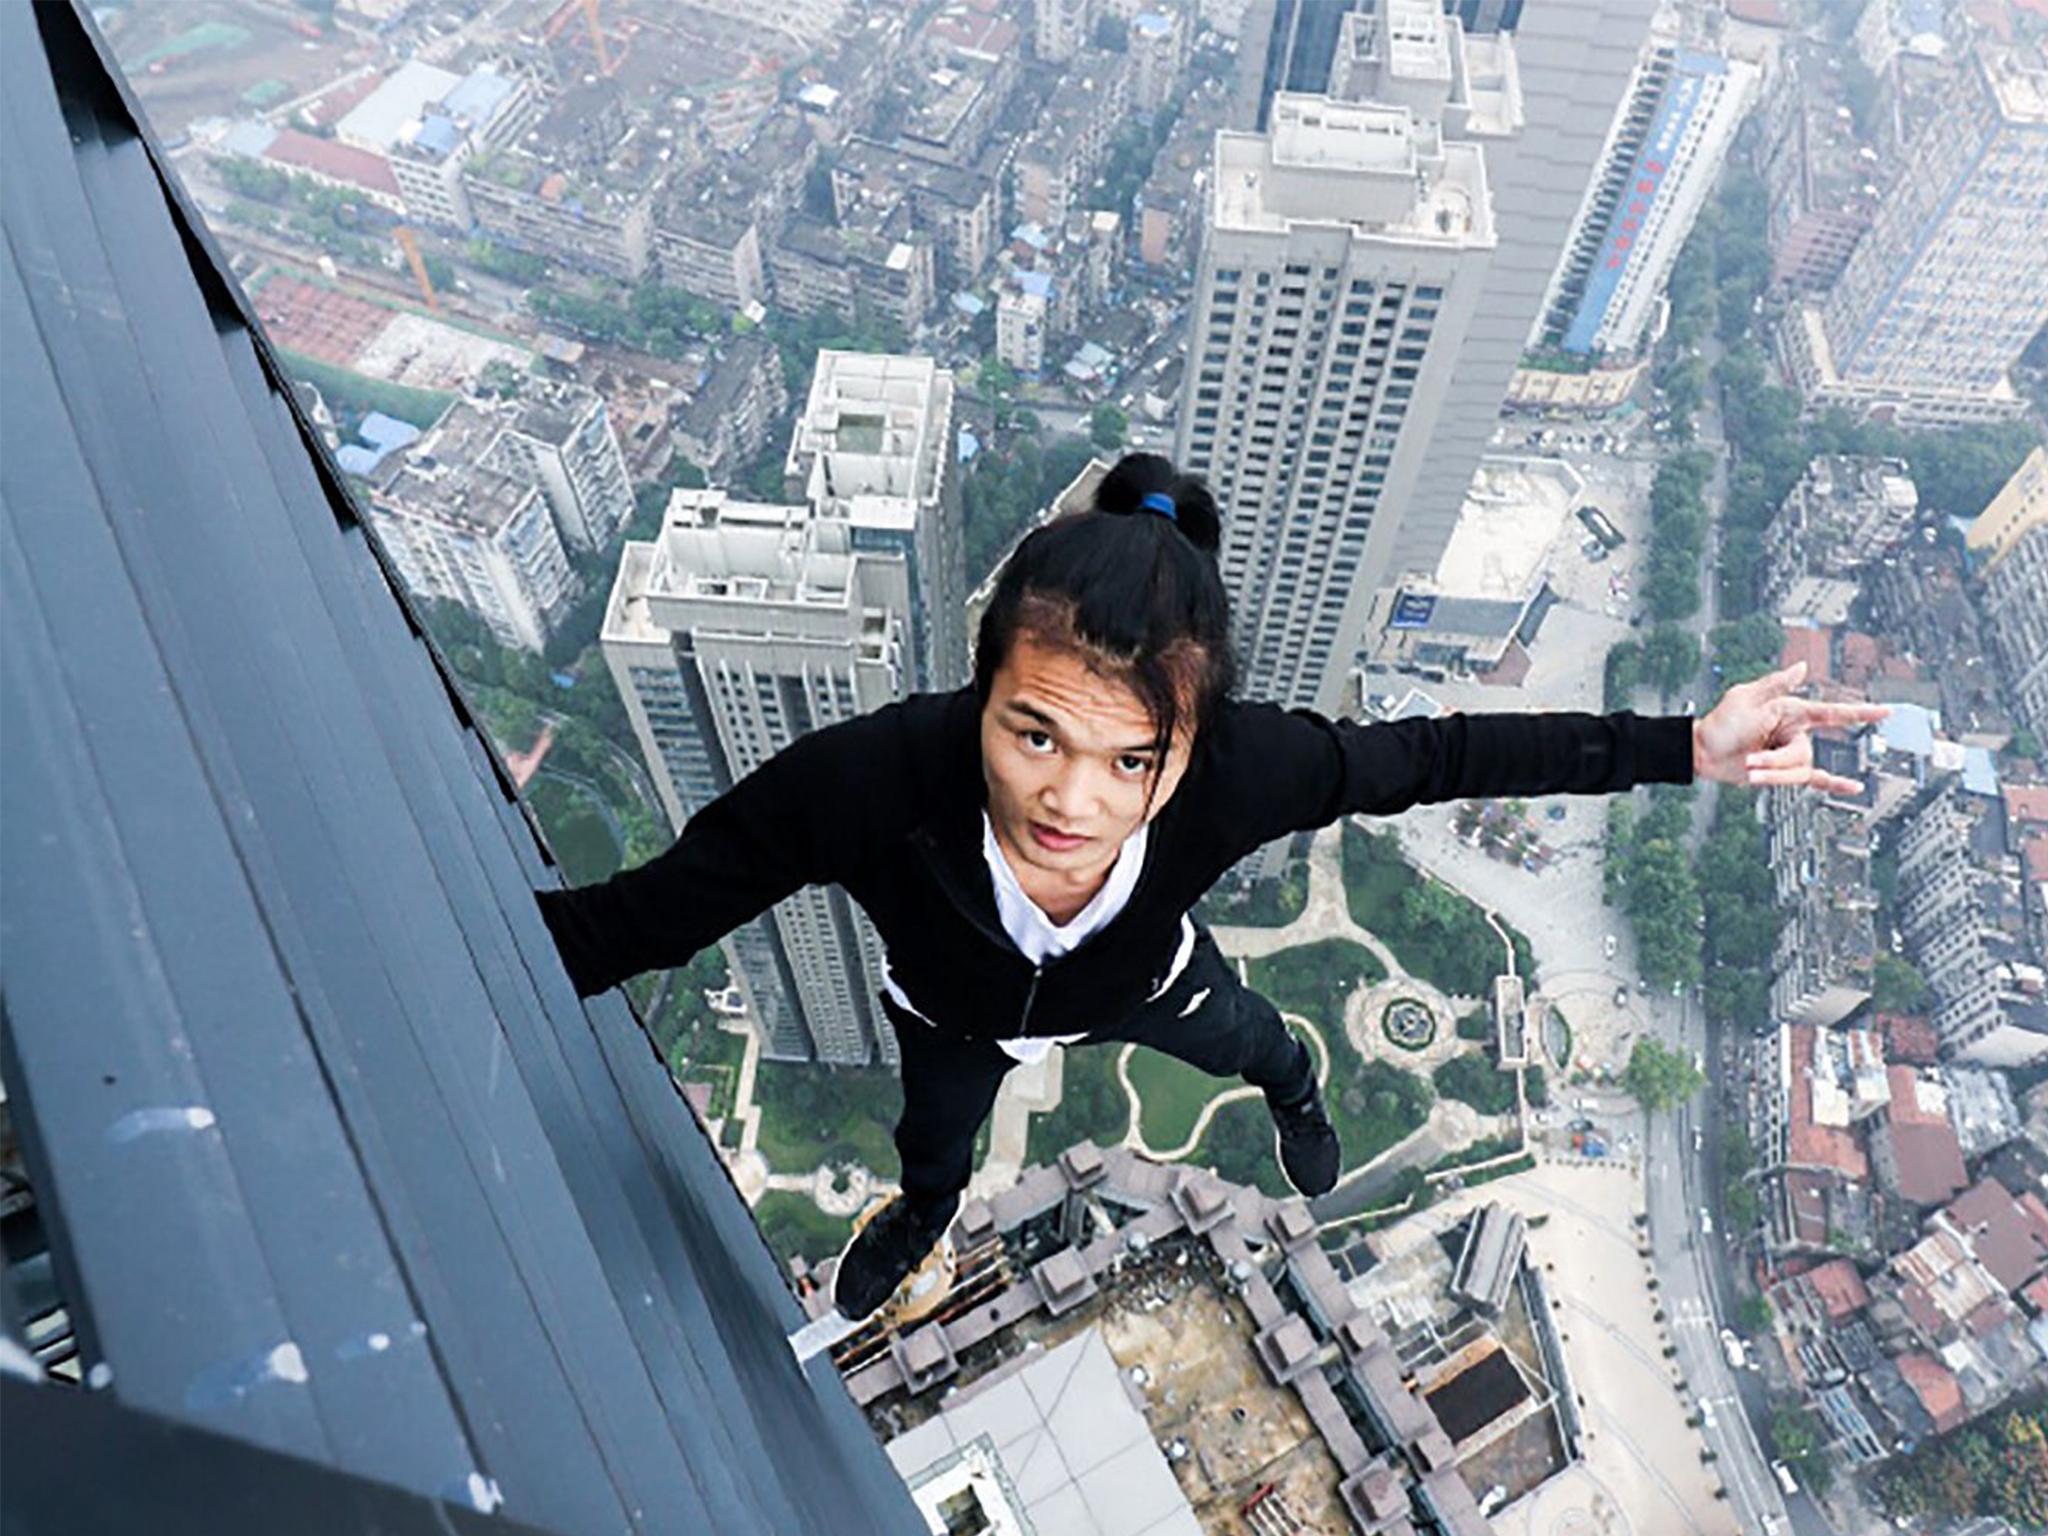 The social media star fell to his death after losing his grip from a 62 storey skyscraper in Changsa, China